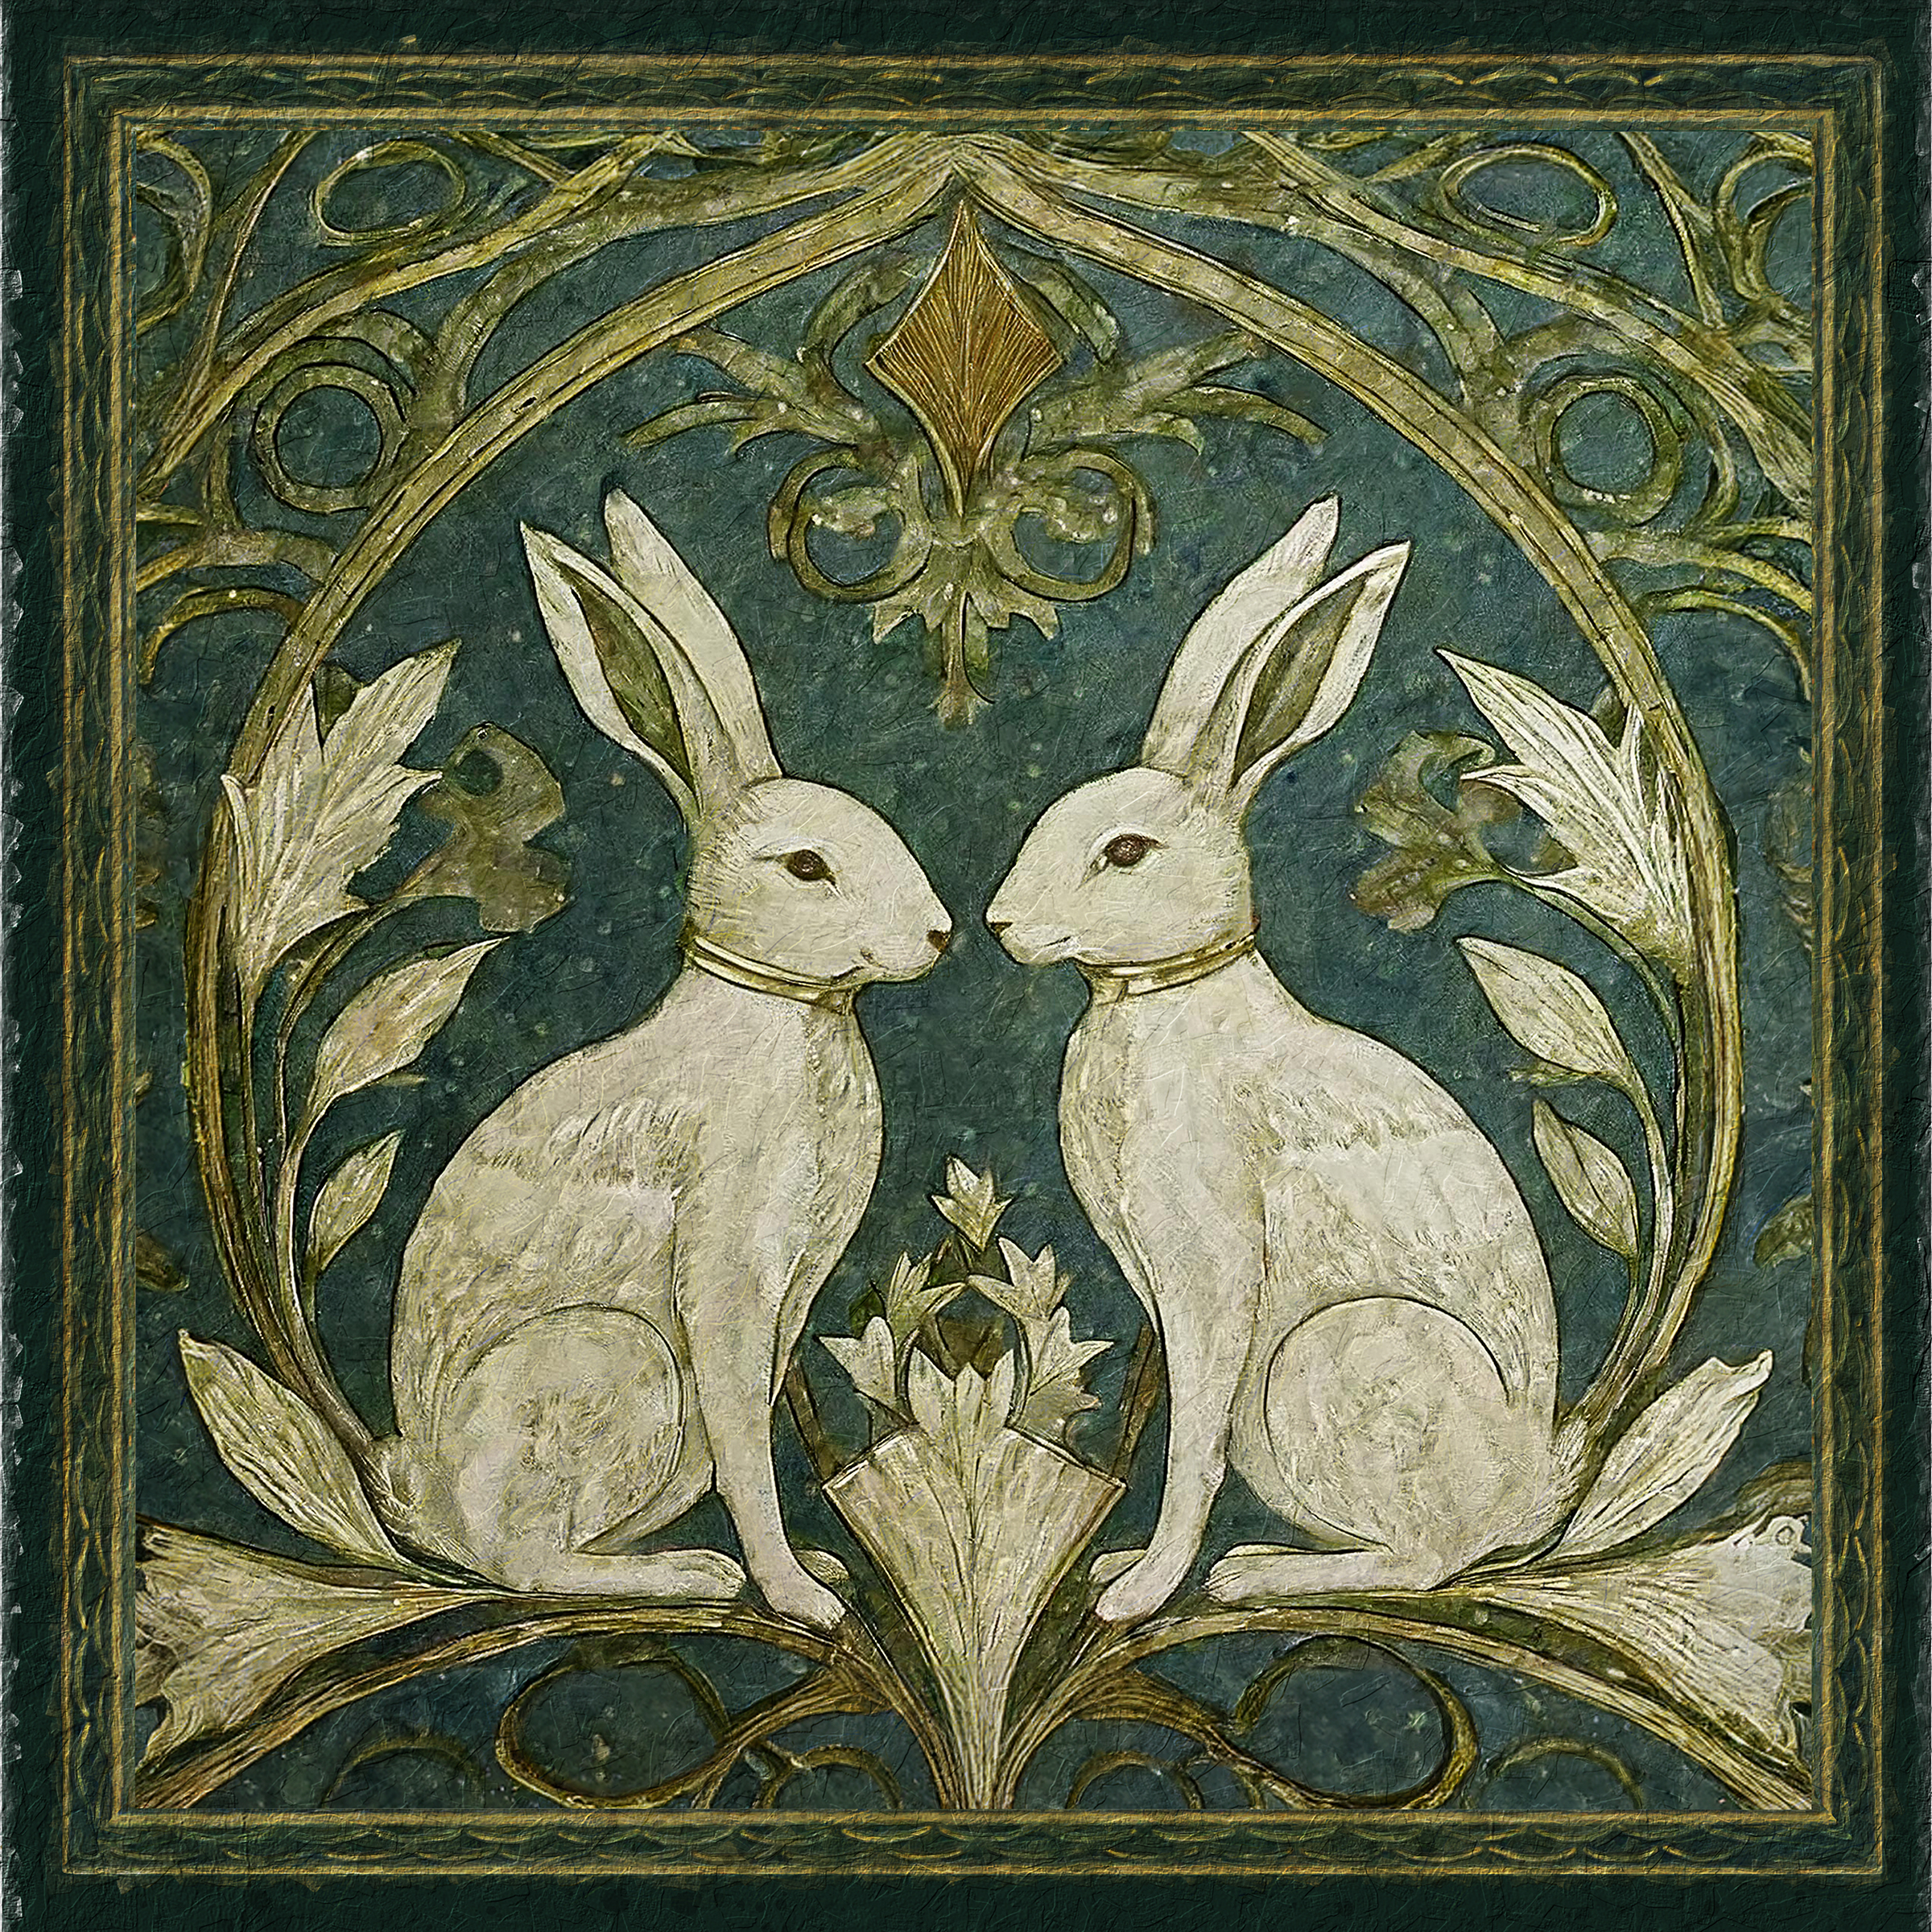 Easter Botanical/Zoological Two Rabbits Framed Print or Decorative Tray